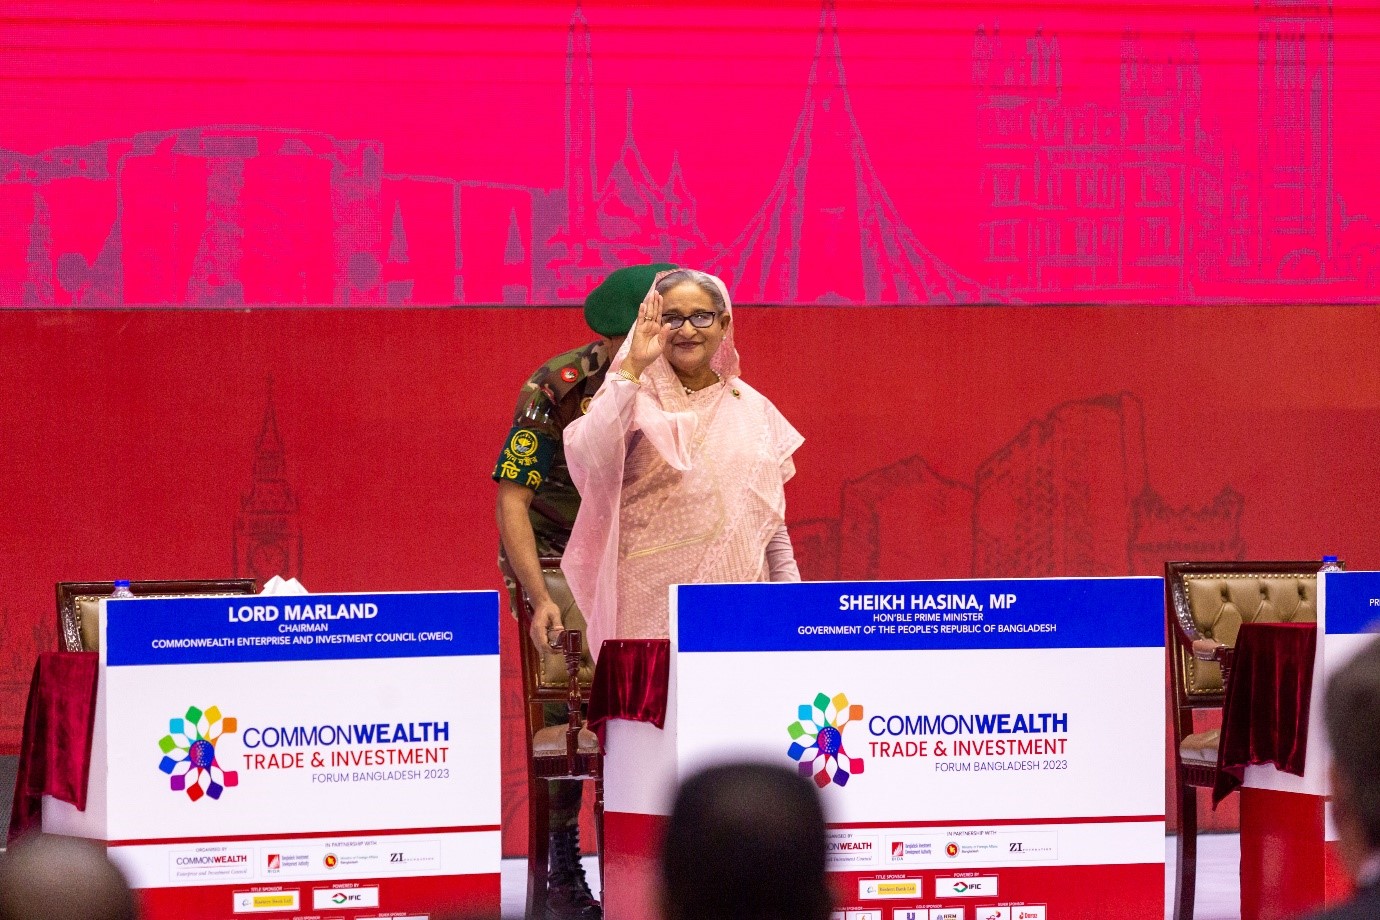 Prime Minister of Bangladesh, H.E. Sheikh Hasina, MP officially inaugurates the Commonwealth Trade and Investment Forum in Dhaka